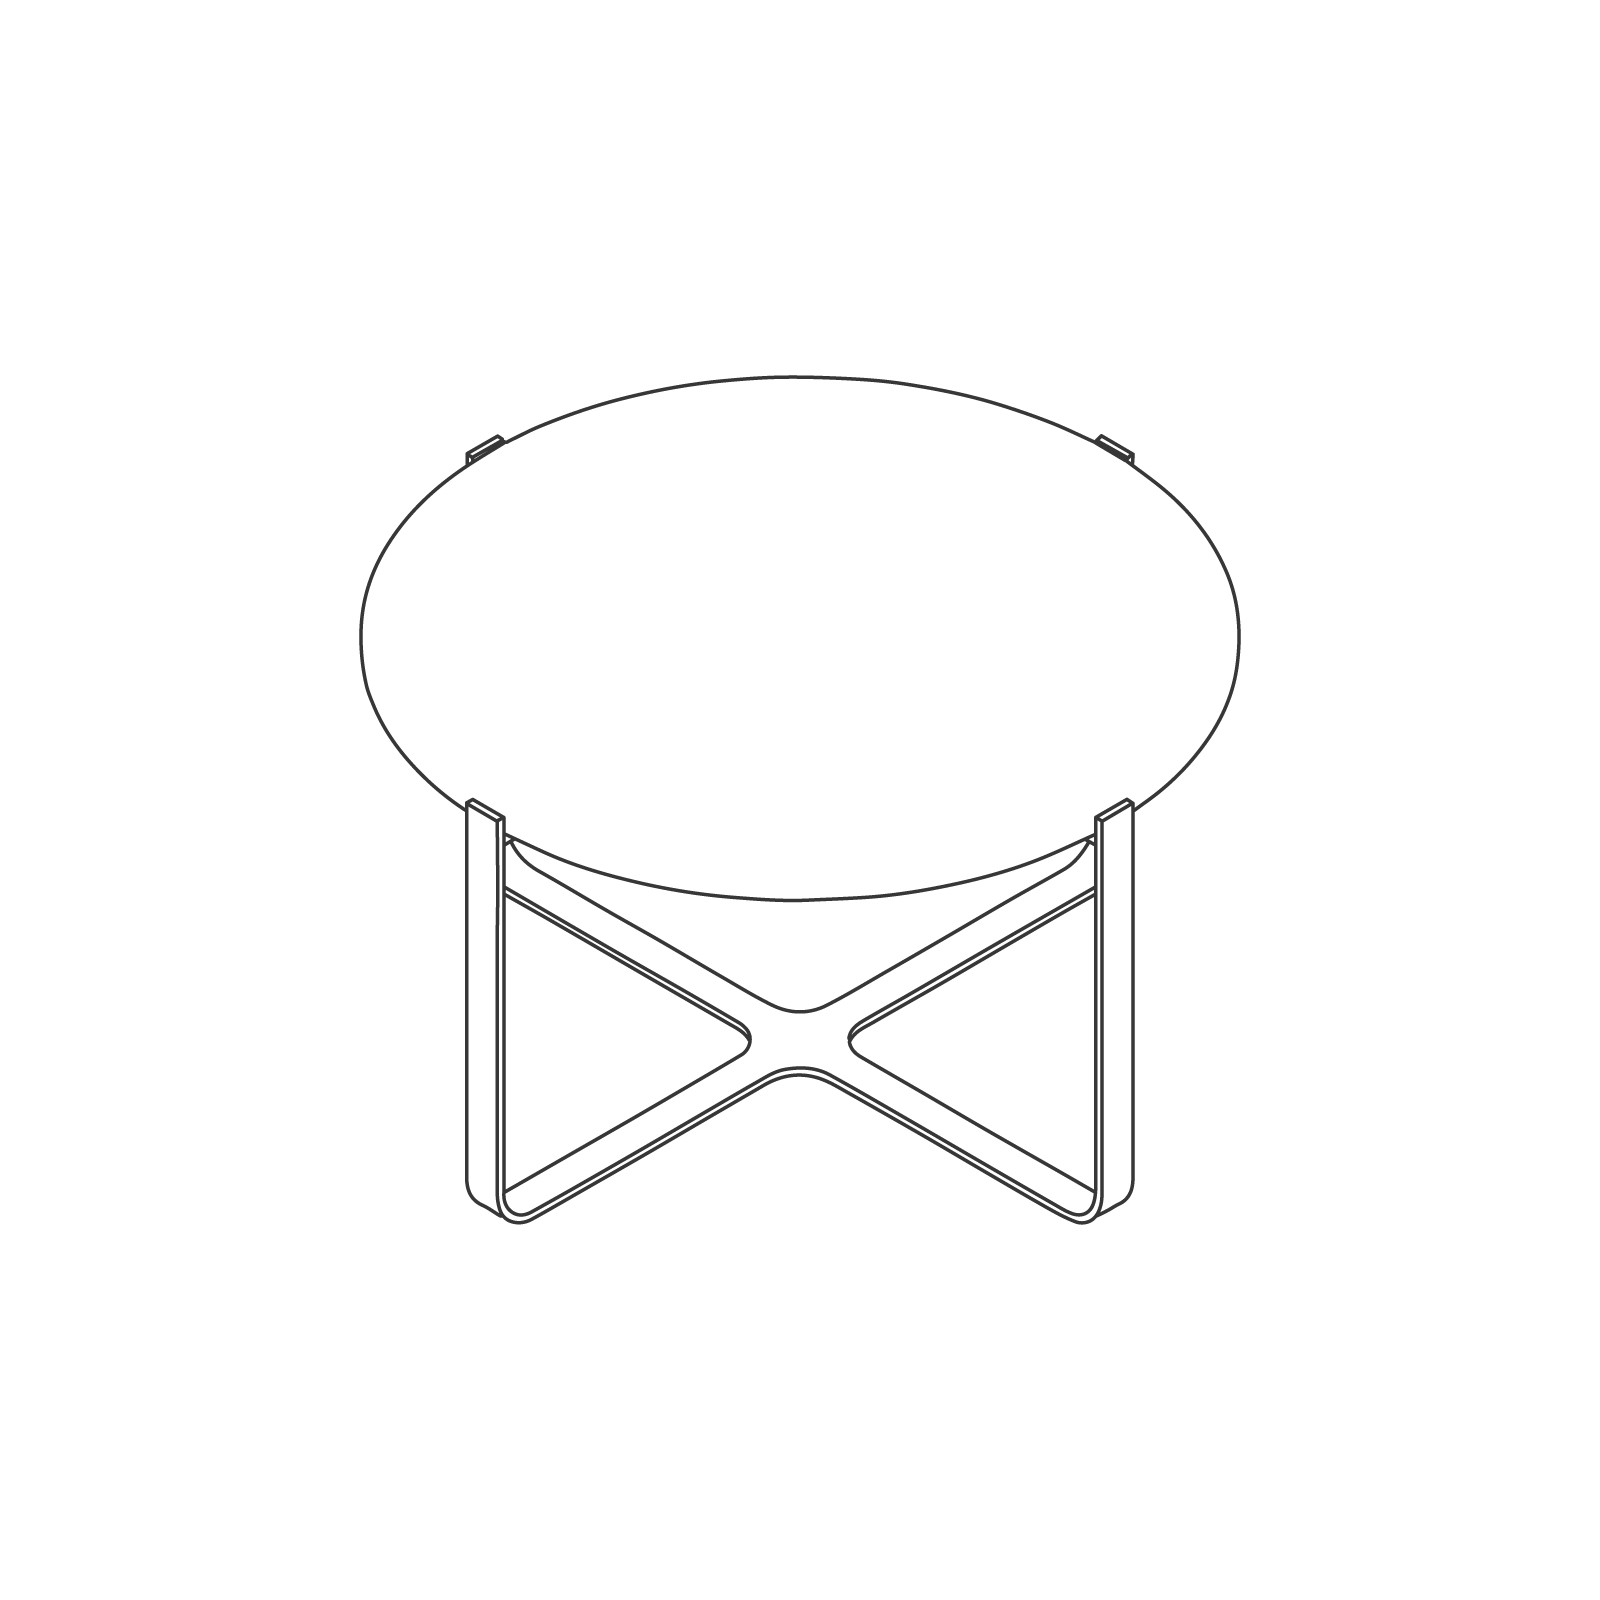 A line drawing of Trace Coffee Table–Round.